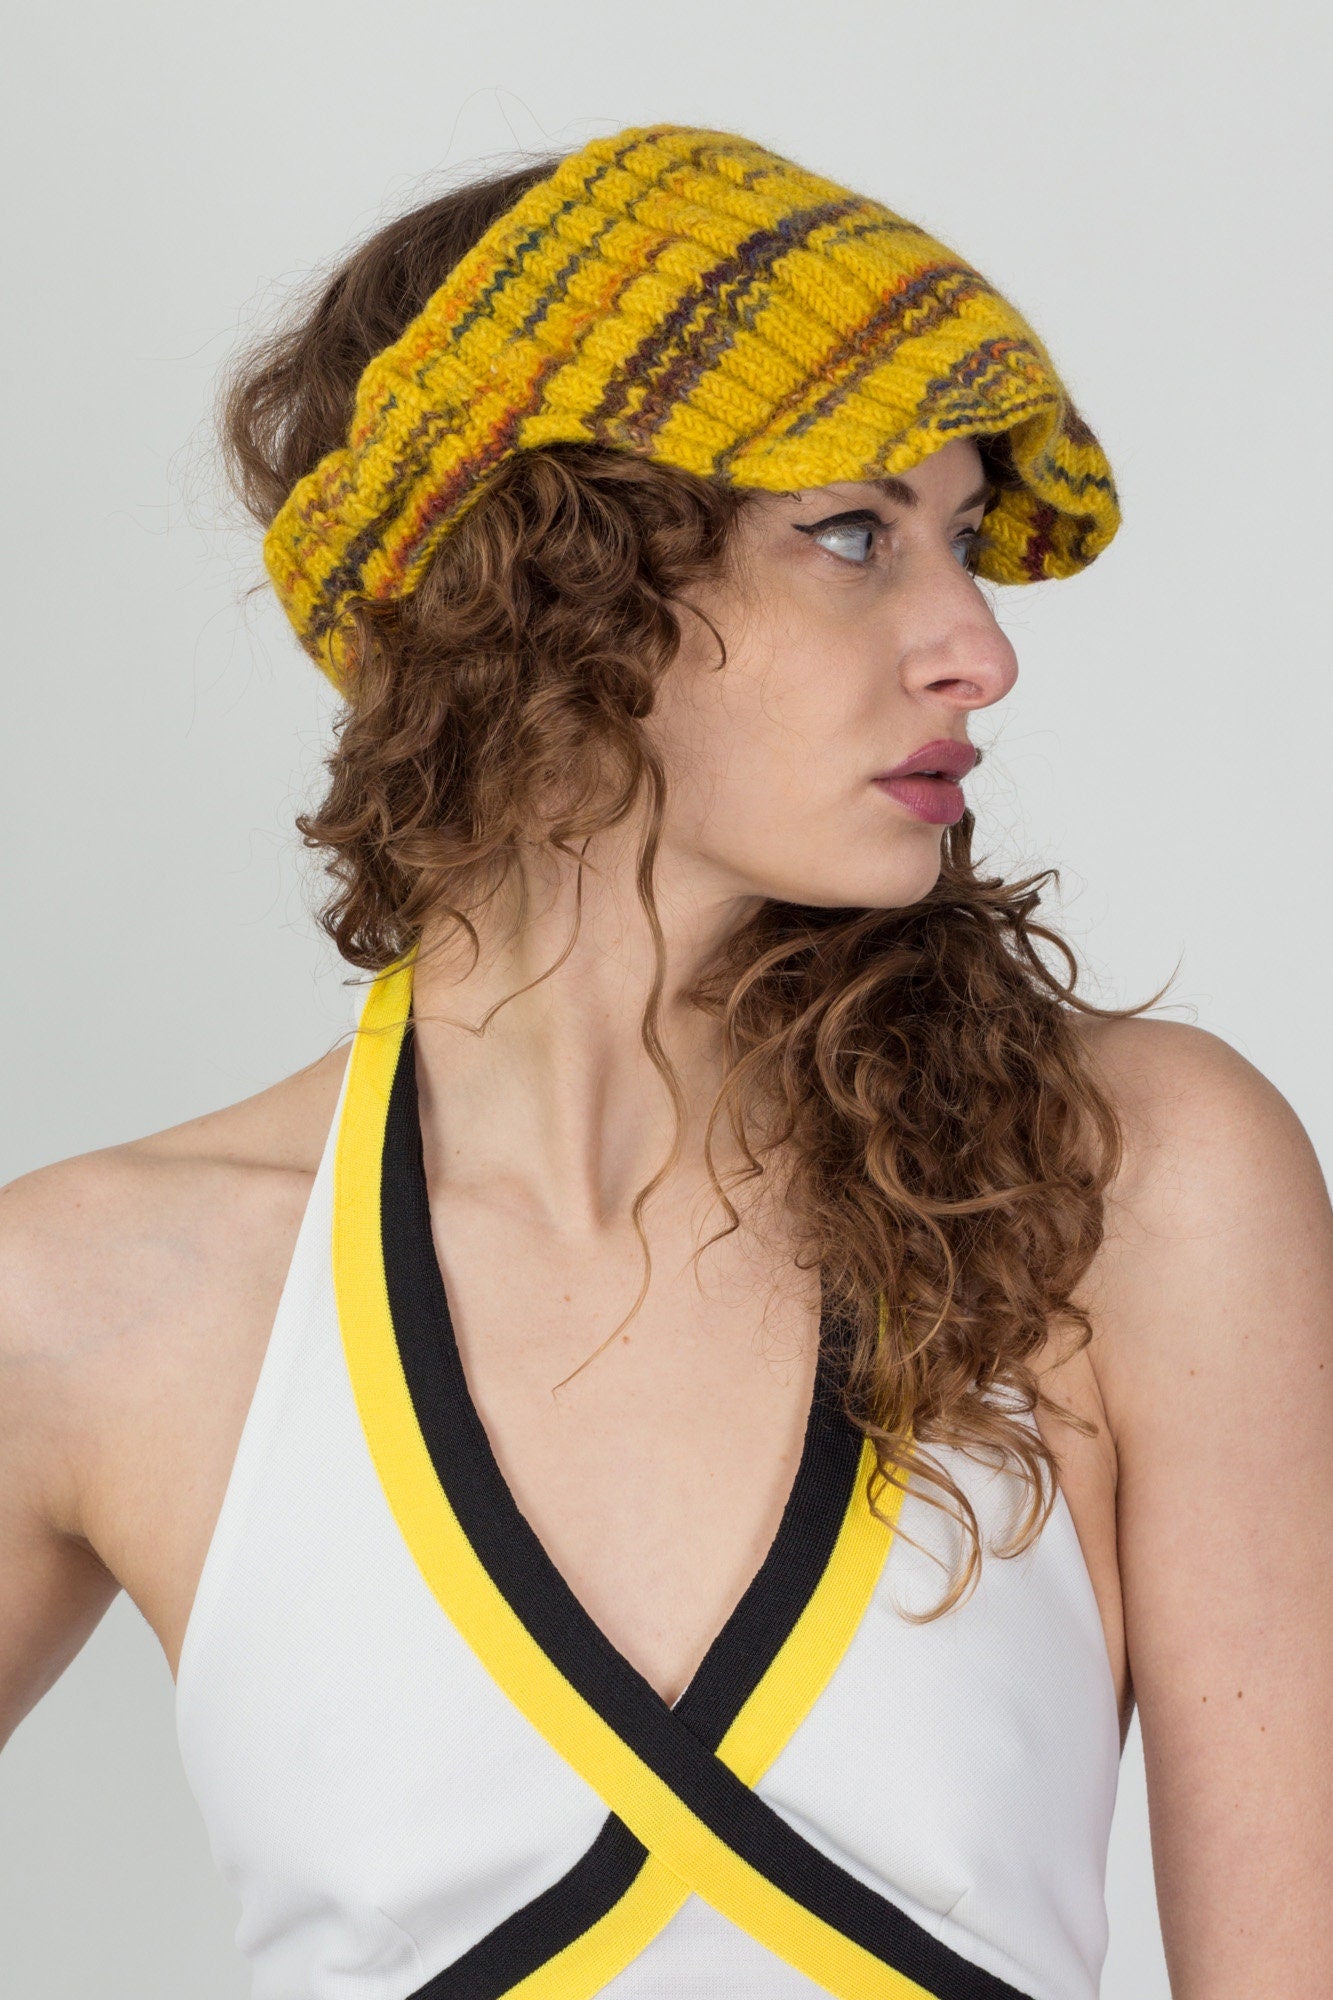 – Winter Apple - & Striped Adult Beanie Yellow Visor to Knit Vintage Flying 80s Large Set 70s